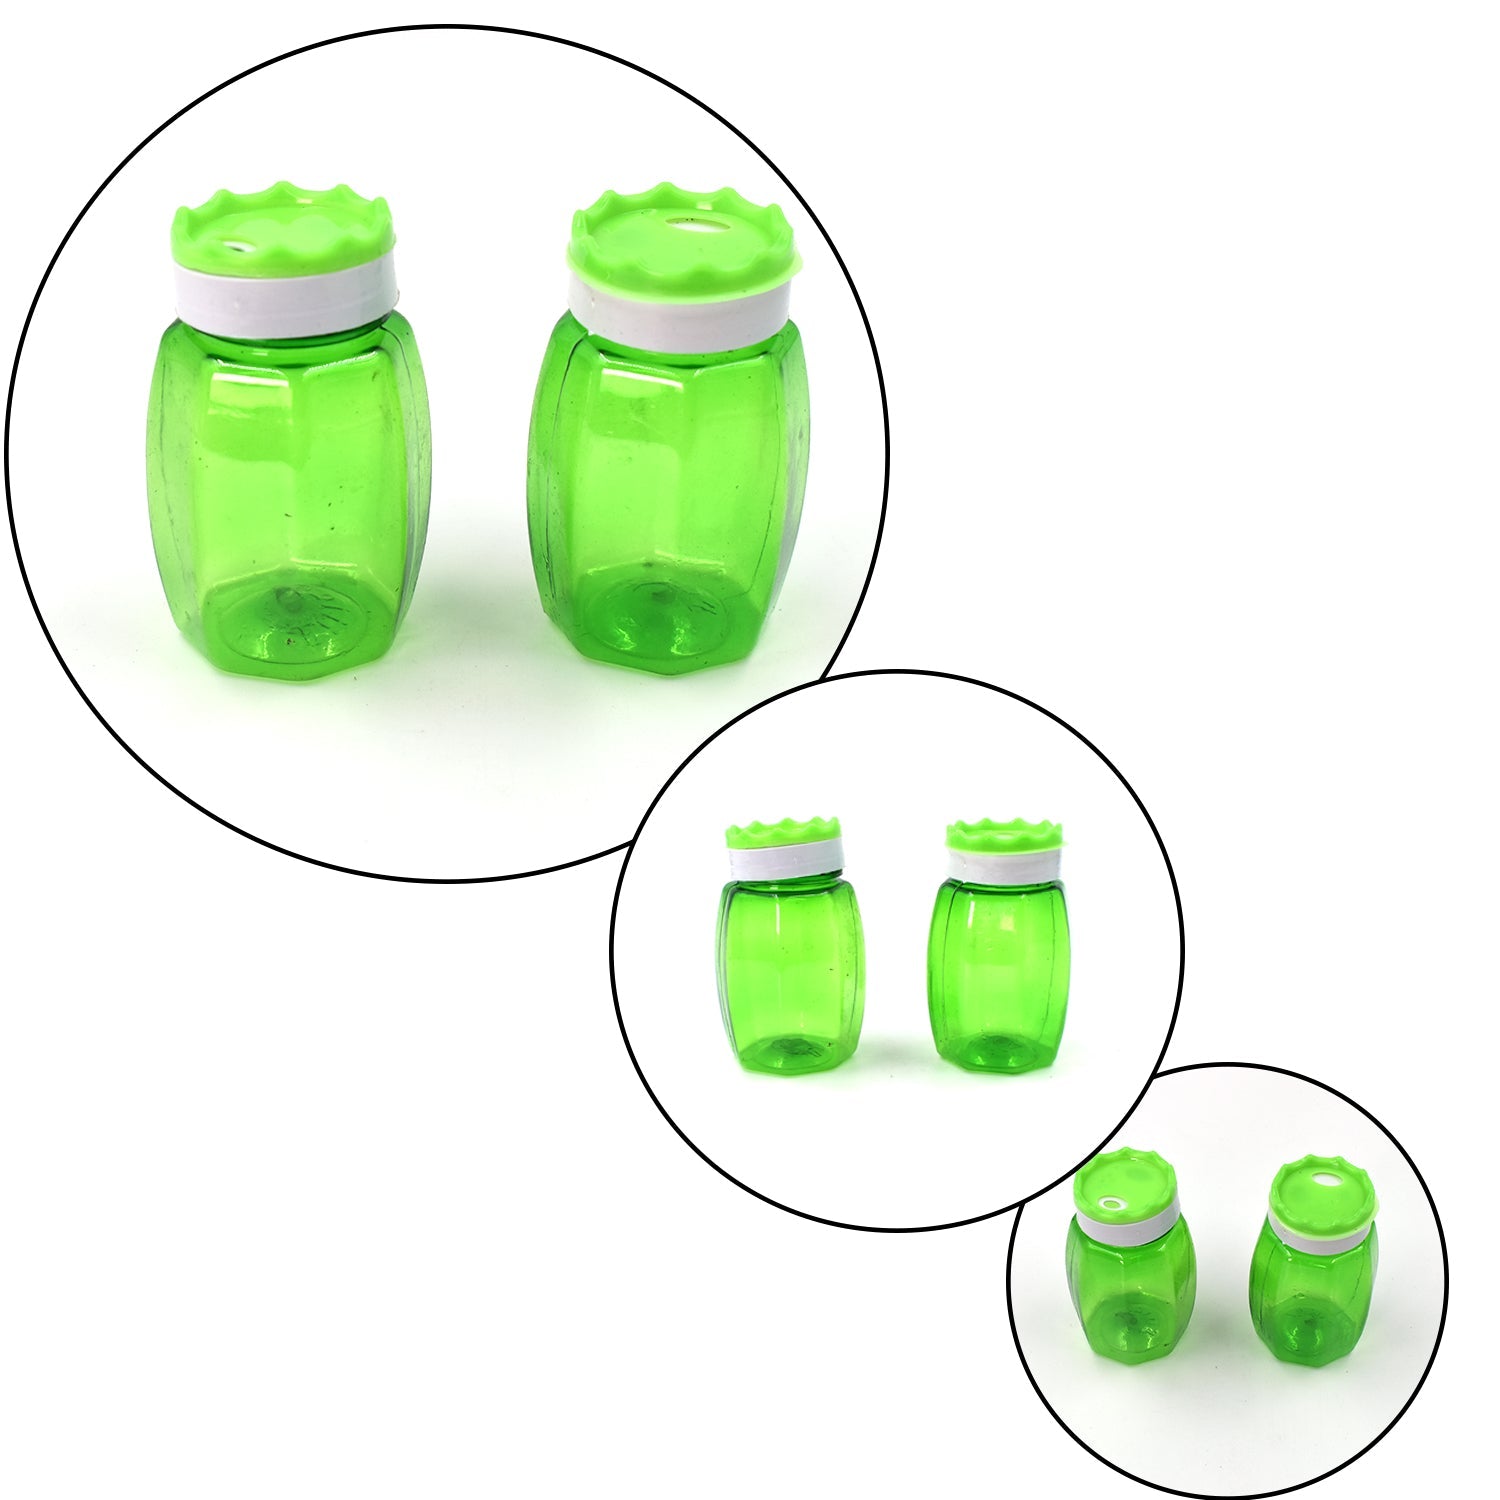 3744 2 Pc Salt N Shaker Set used in all kinds of household and official places during serving of foods and stuff etc. freeshipping - DeoDap